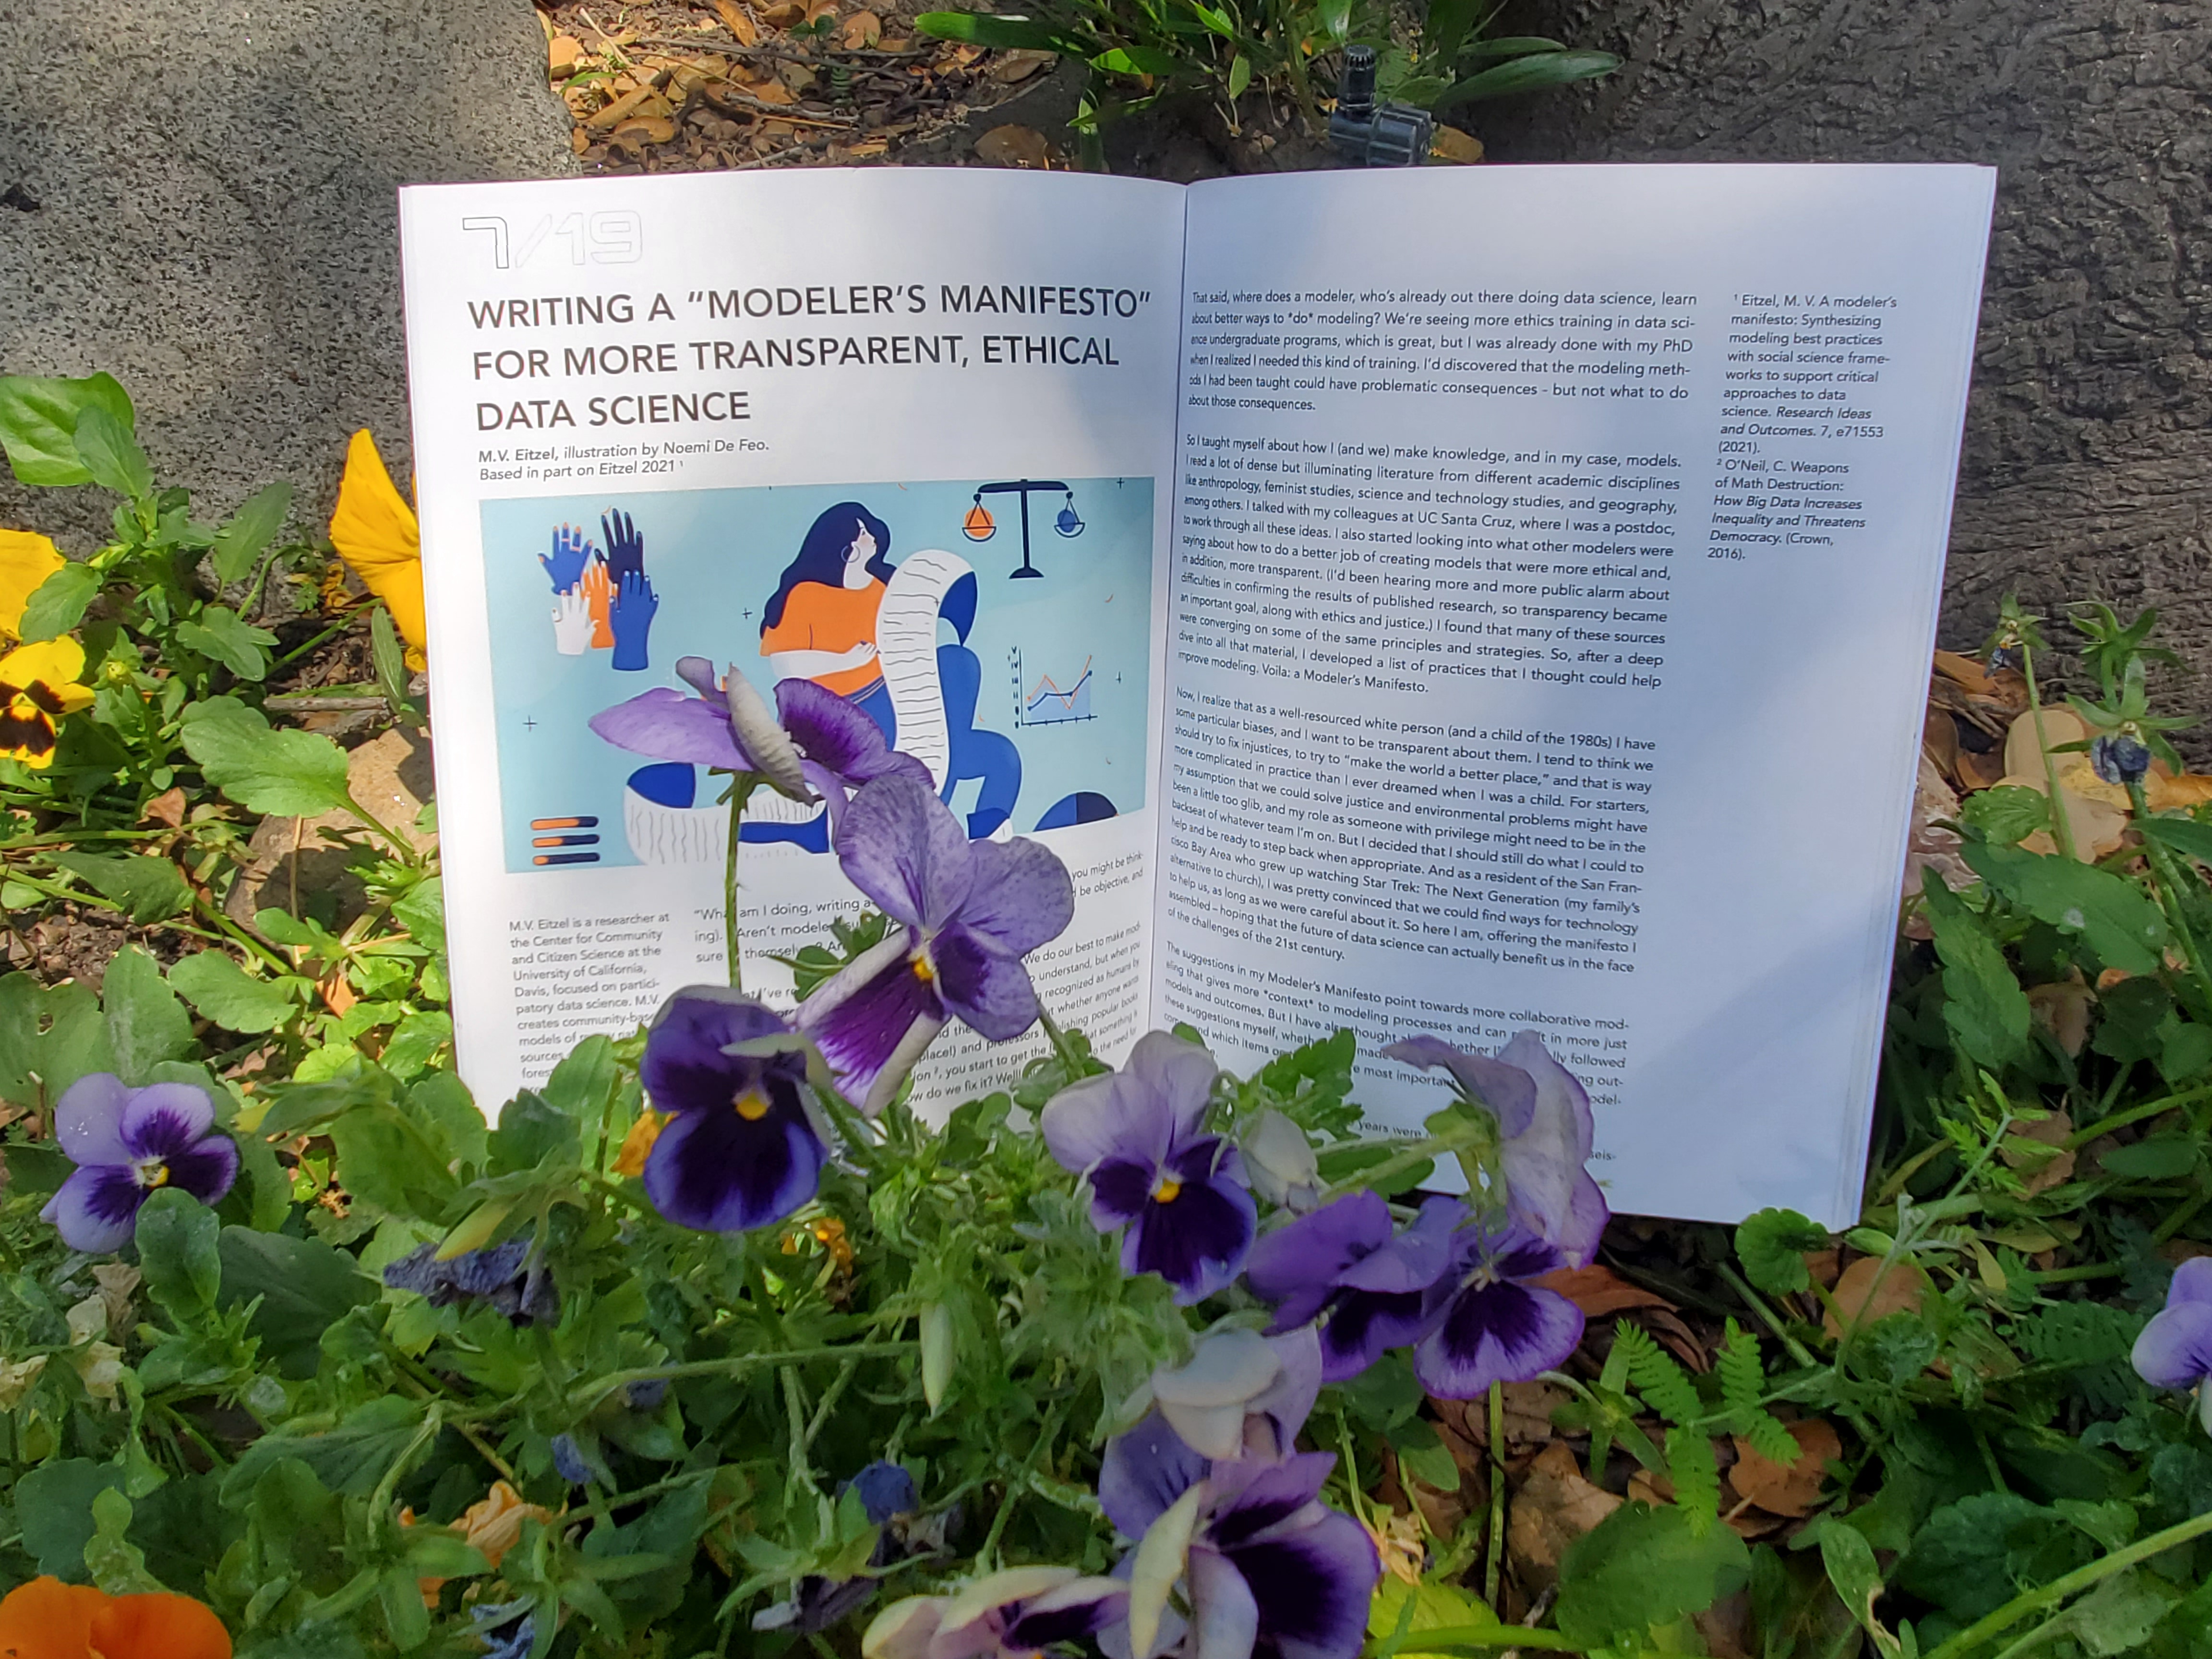 Photograph of an open book with illustration and text in a garden with purple flowers